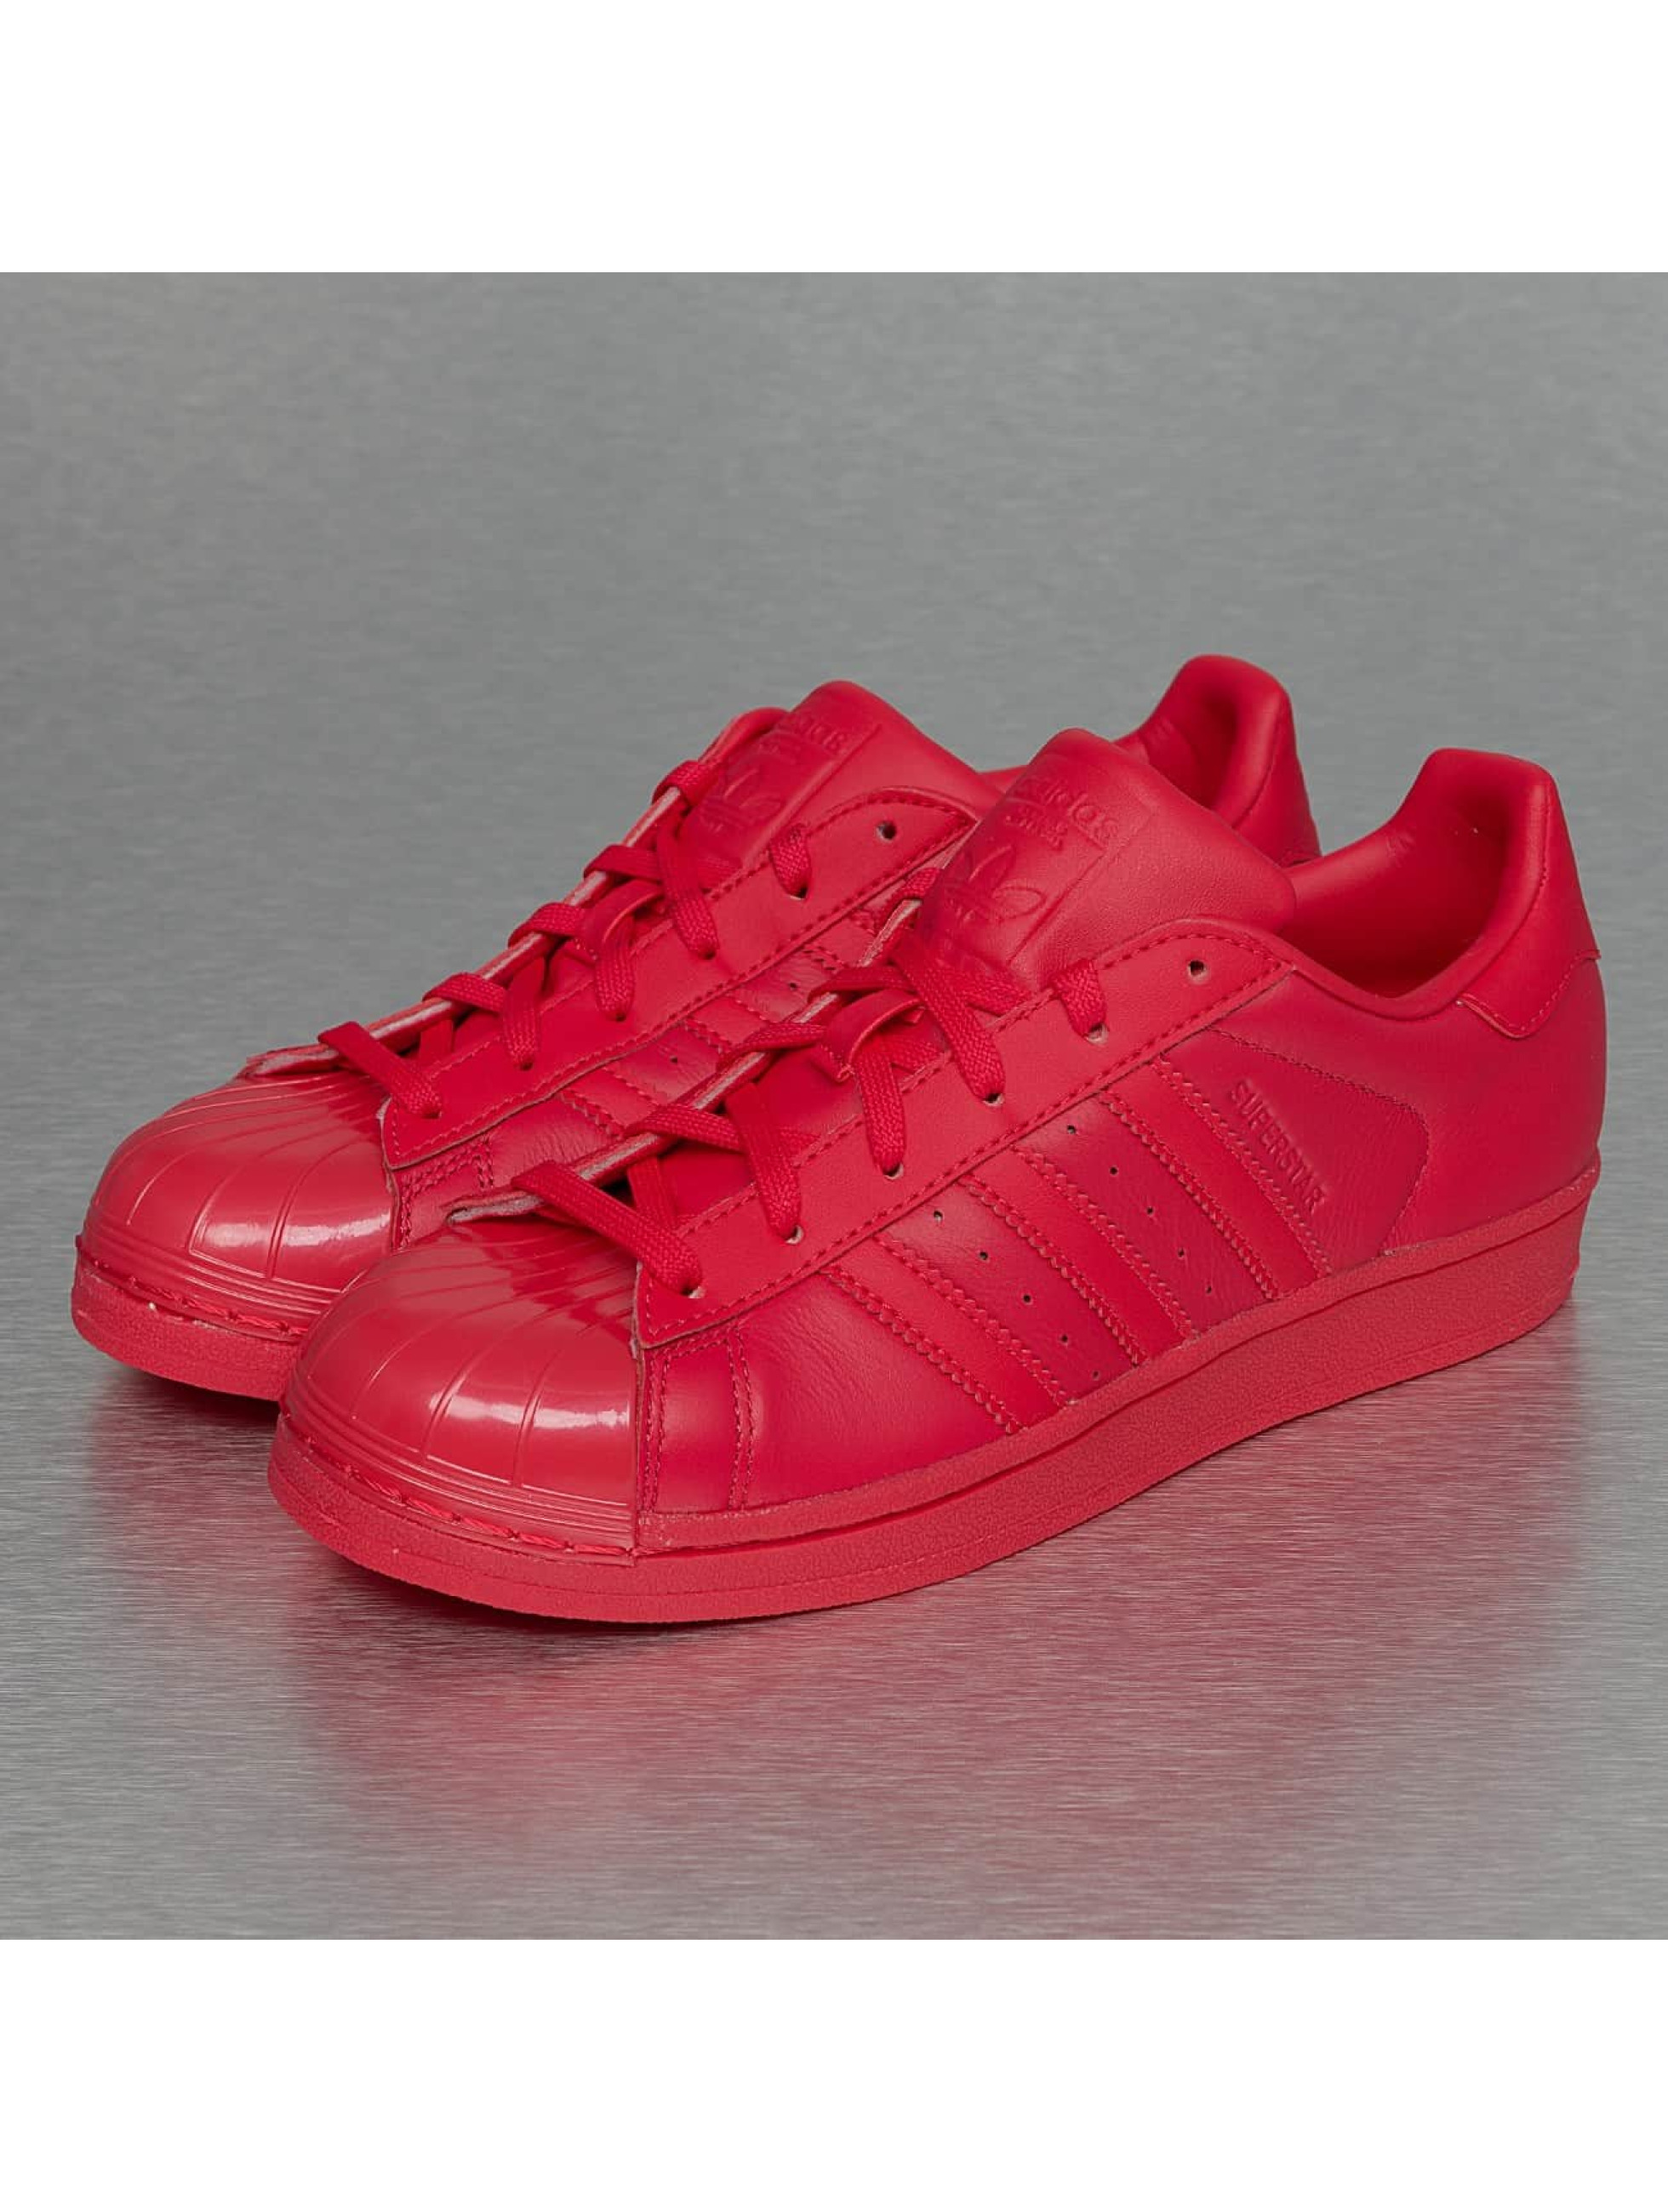 adidas Chaussures / Baskets Superstar Glossy Toe en rouge